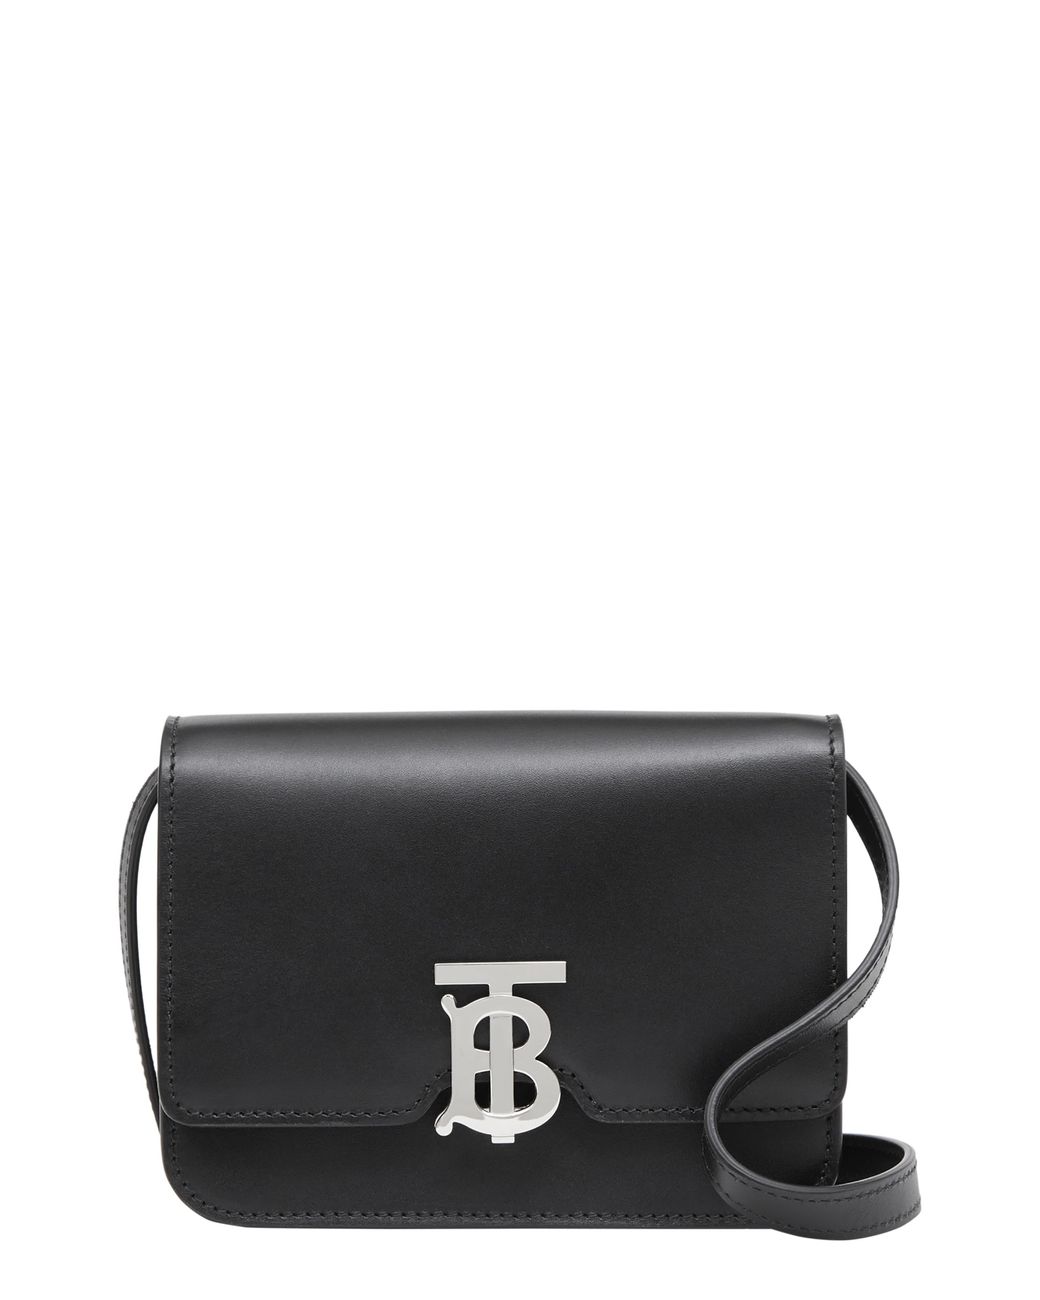 Burberry Mini Leather Tb Bag in Black - Save 31% - Lyst